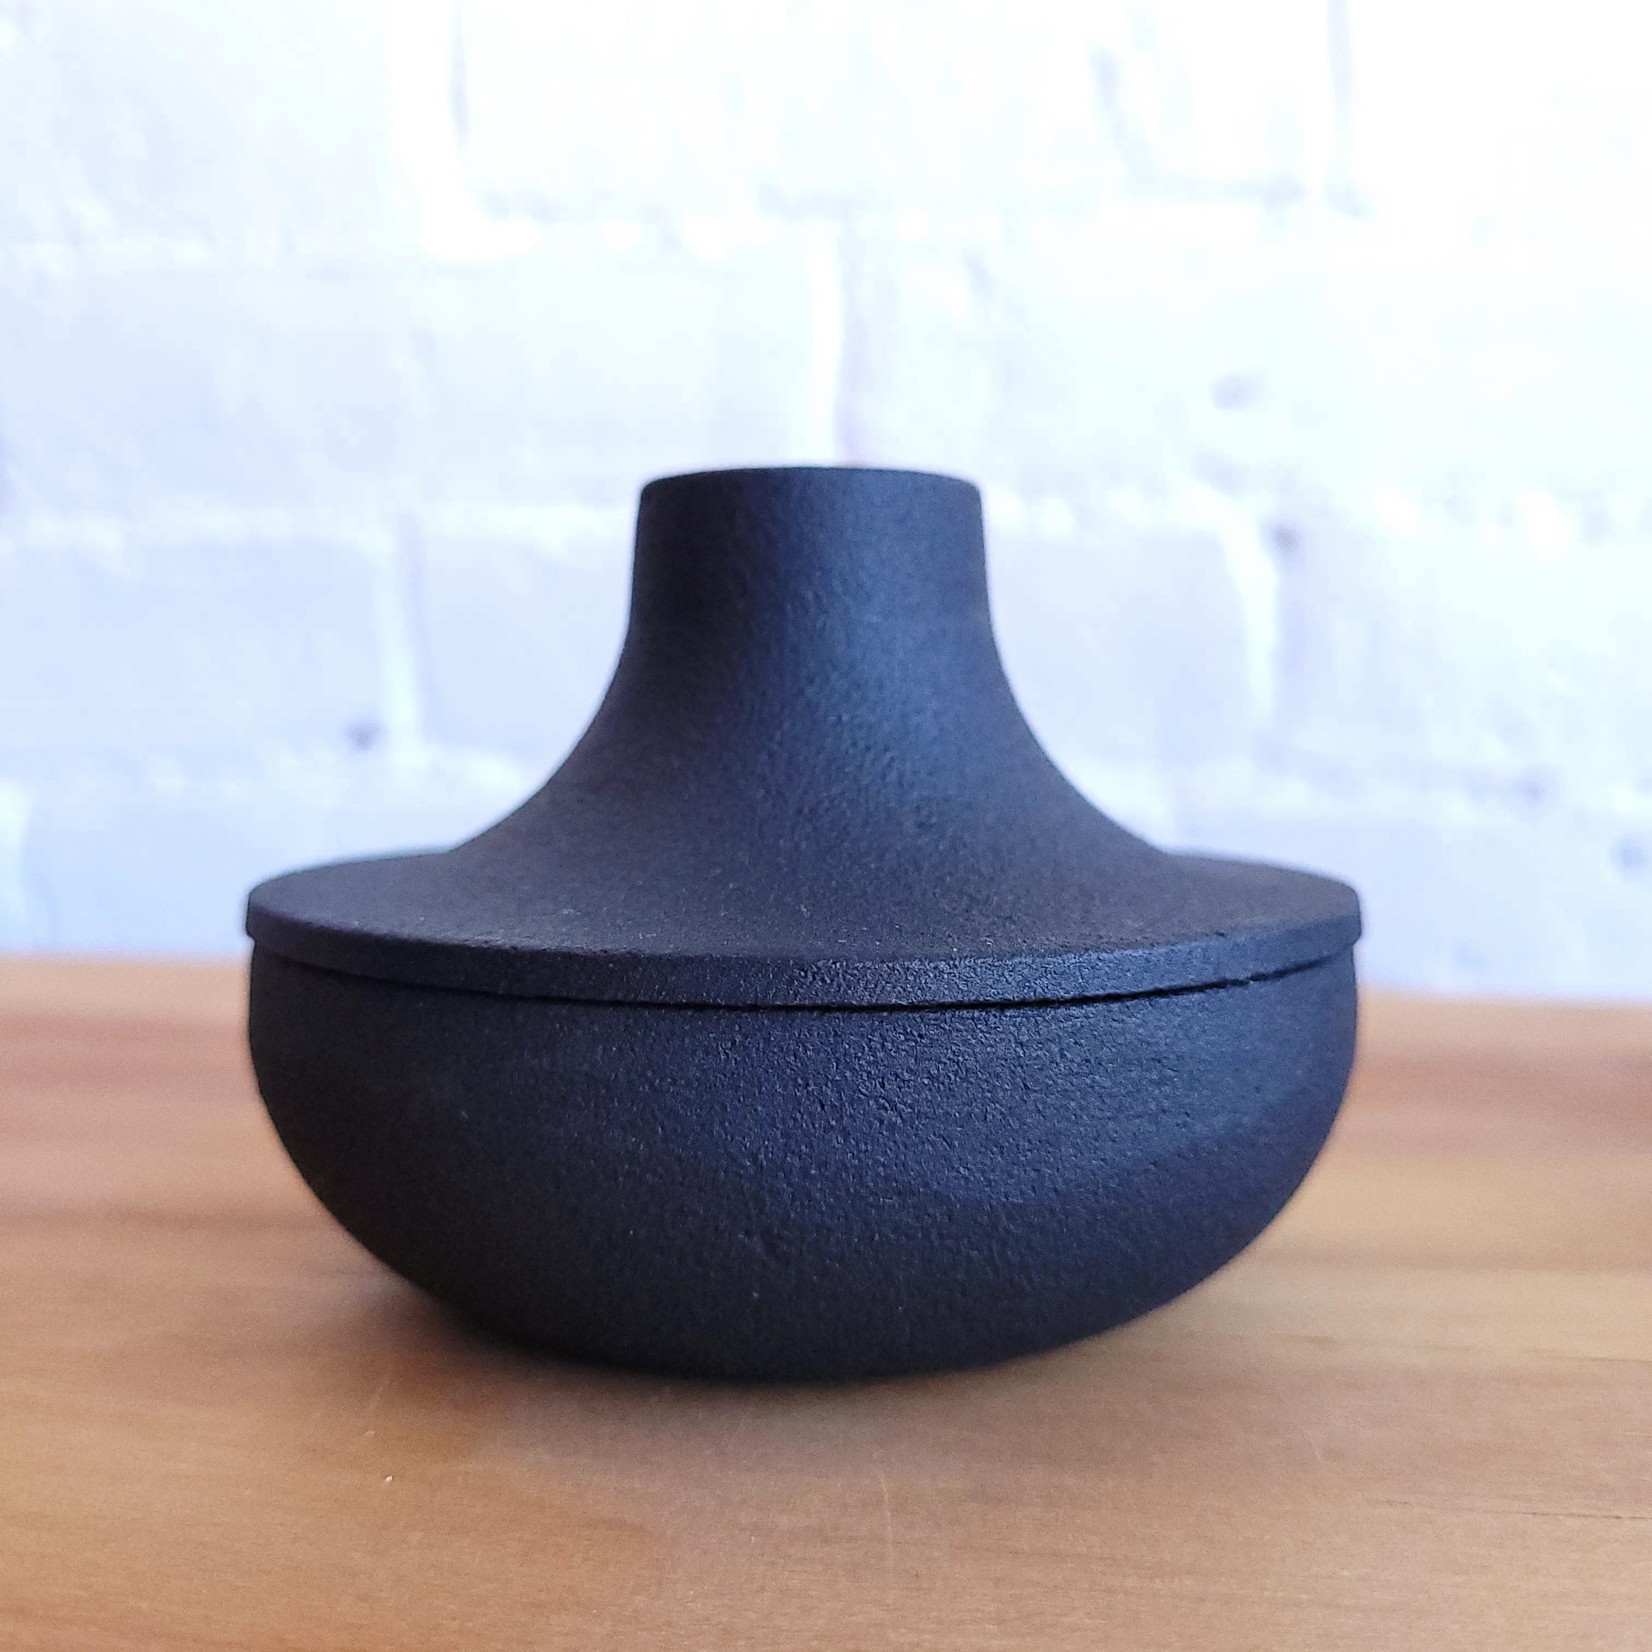 areaware Areaware: Cast Iron 3-in-1 Candle Holder